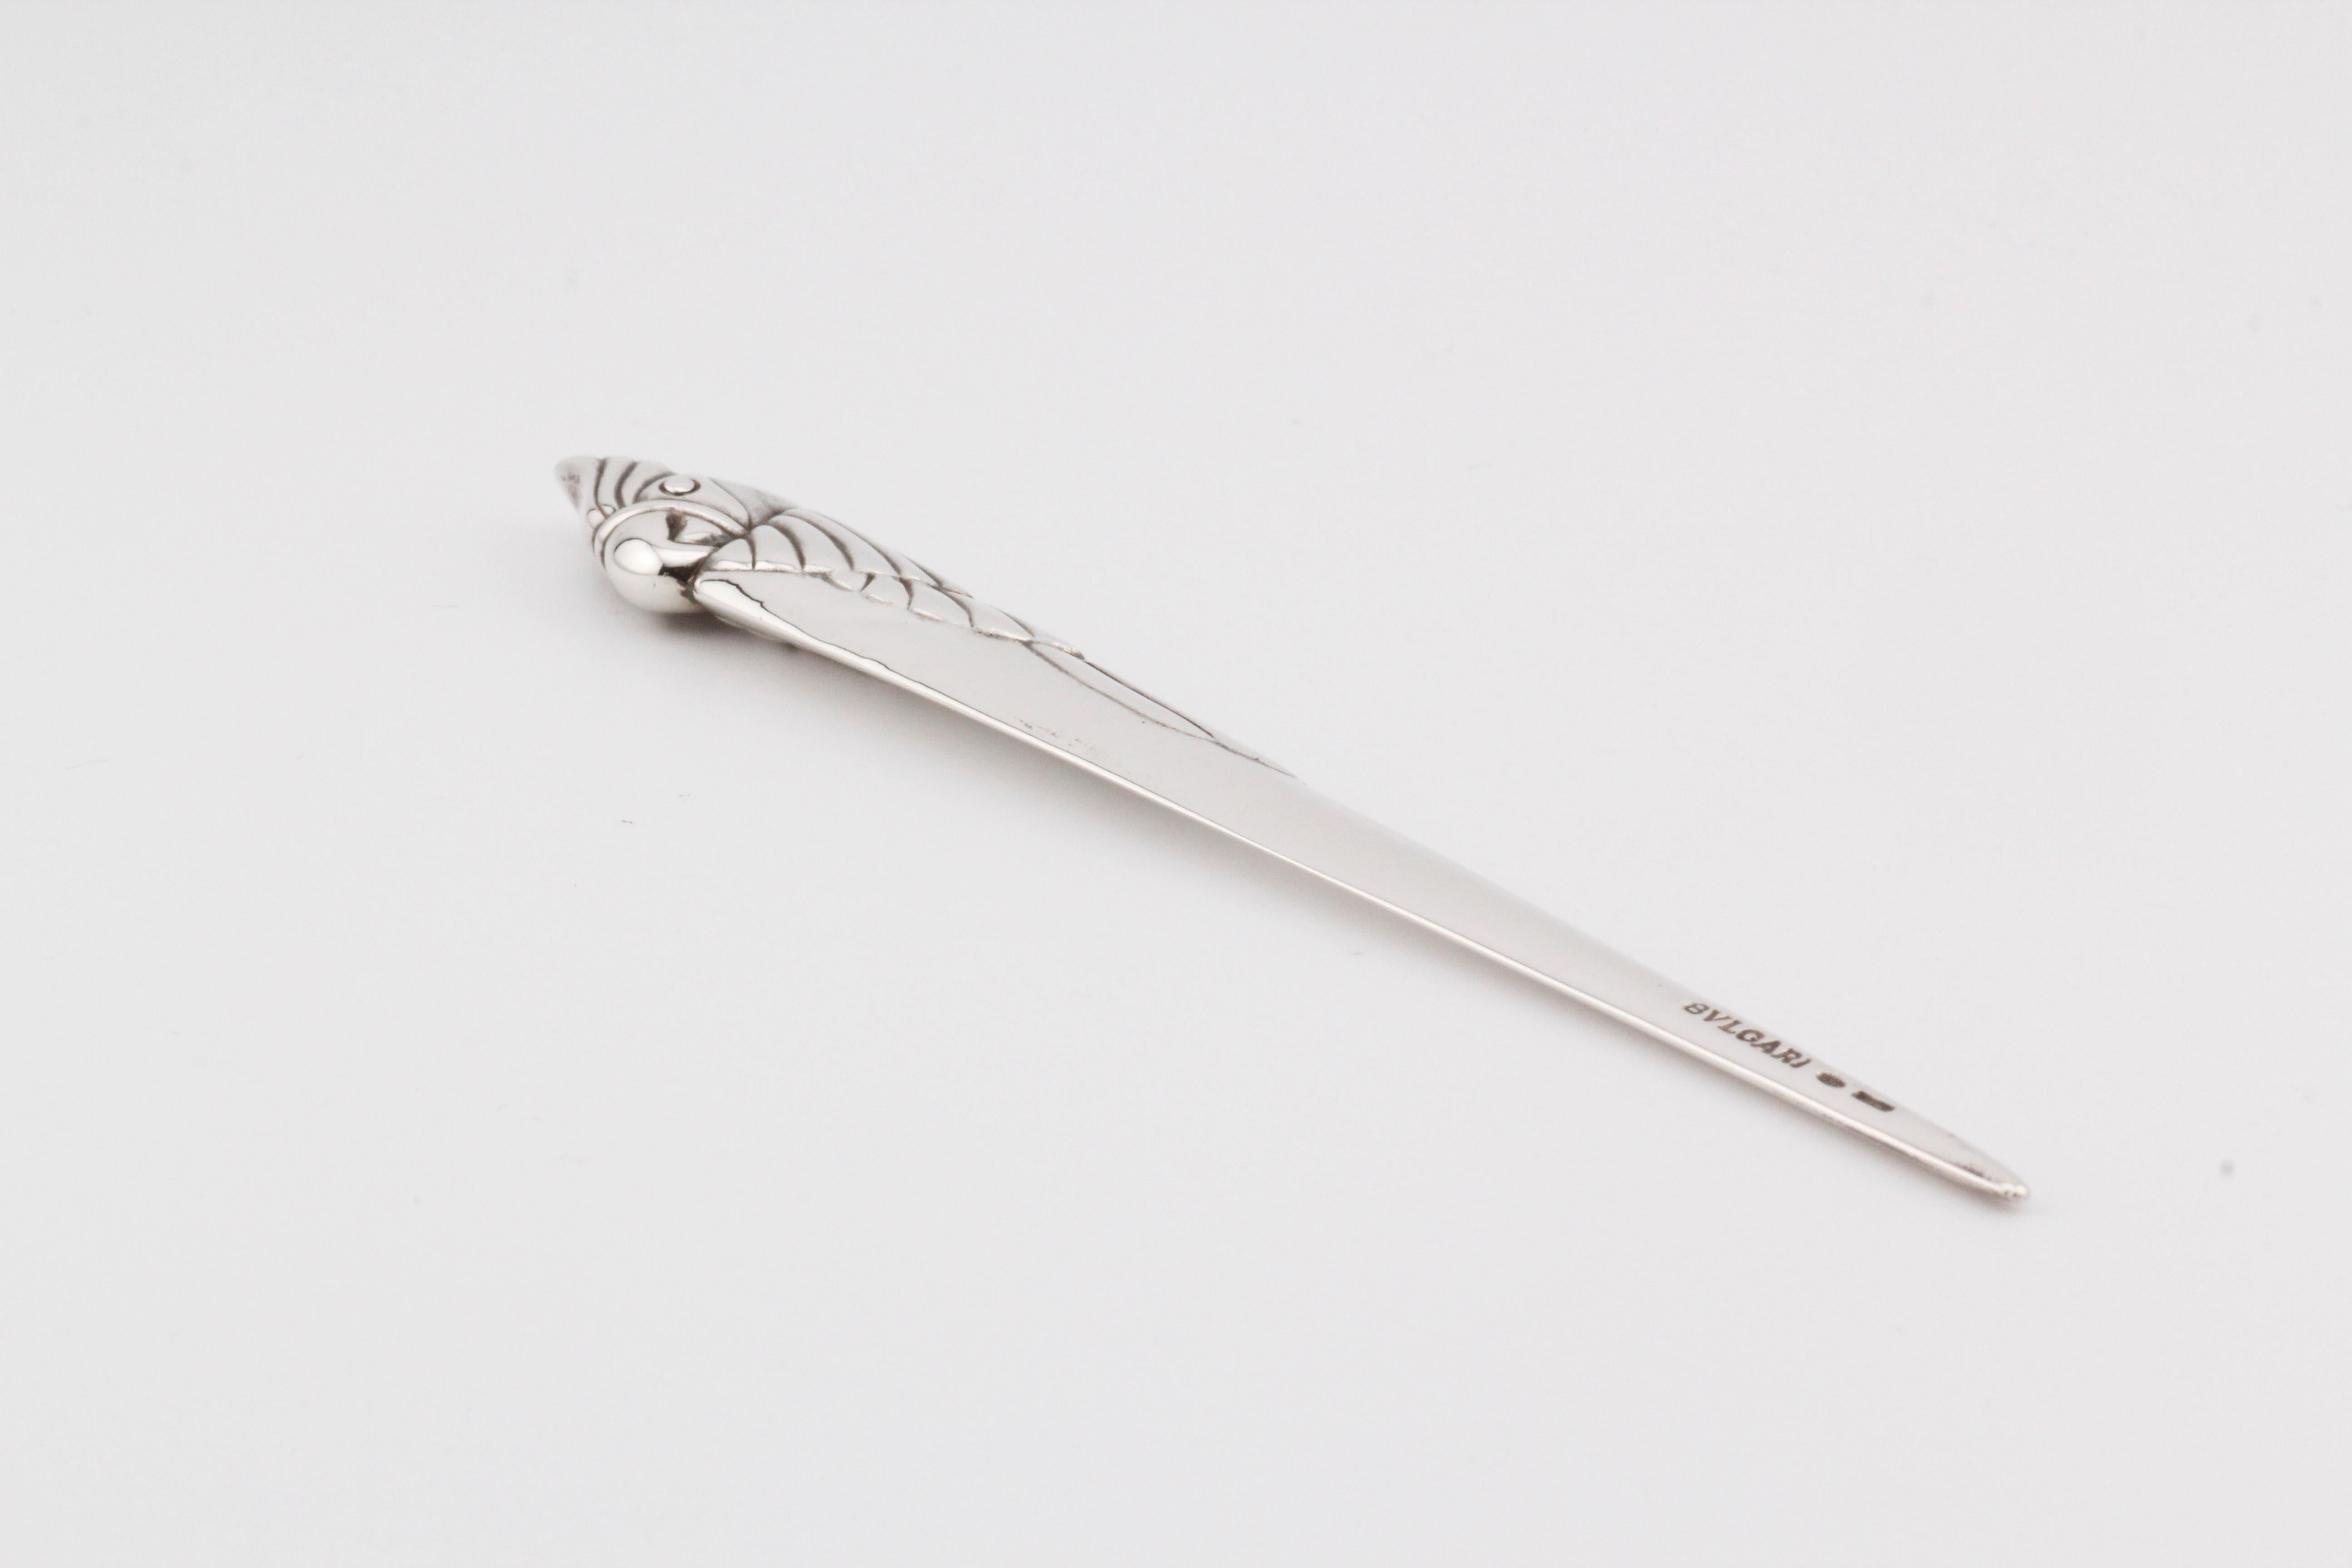 The Bvlgari Sterling Silver Vintage Cockatoo Bird Letter Opener is a luxurious and unique piece crafted by the renowned Italian luxury brand Bvlgari. This exquisite letter opener features a handle in the shape of a parrot bird, intricately detailed